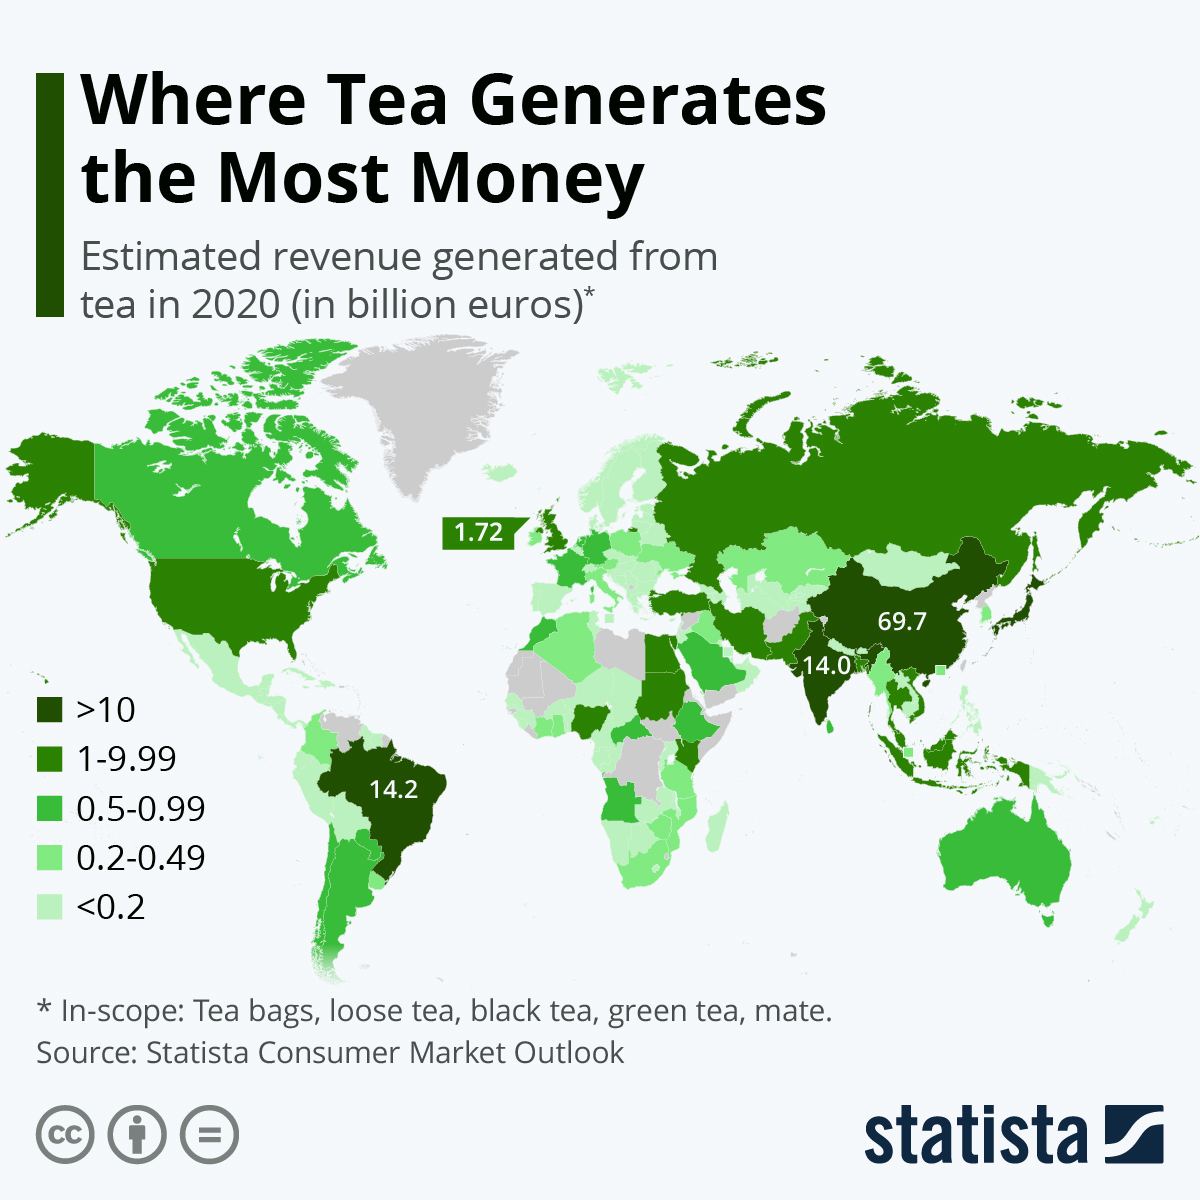 Where does tea generates the most money?